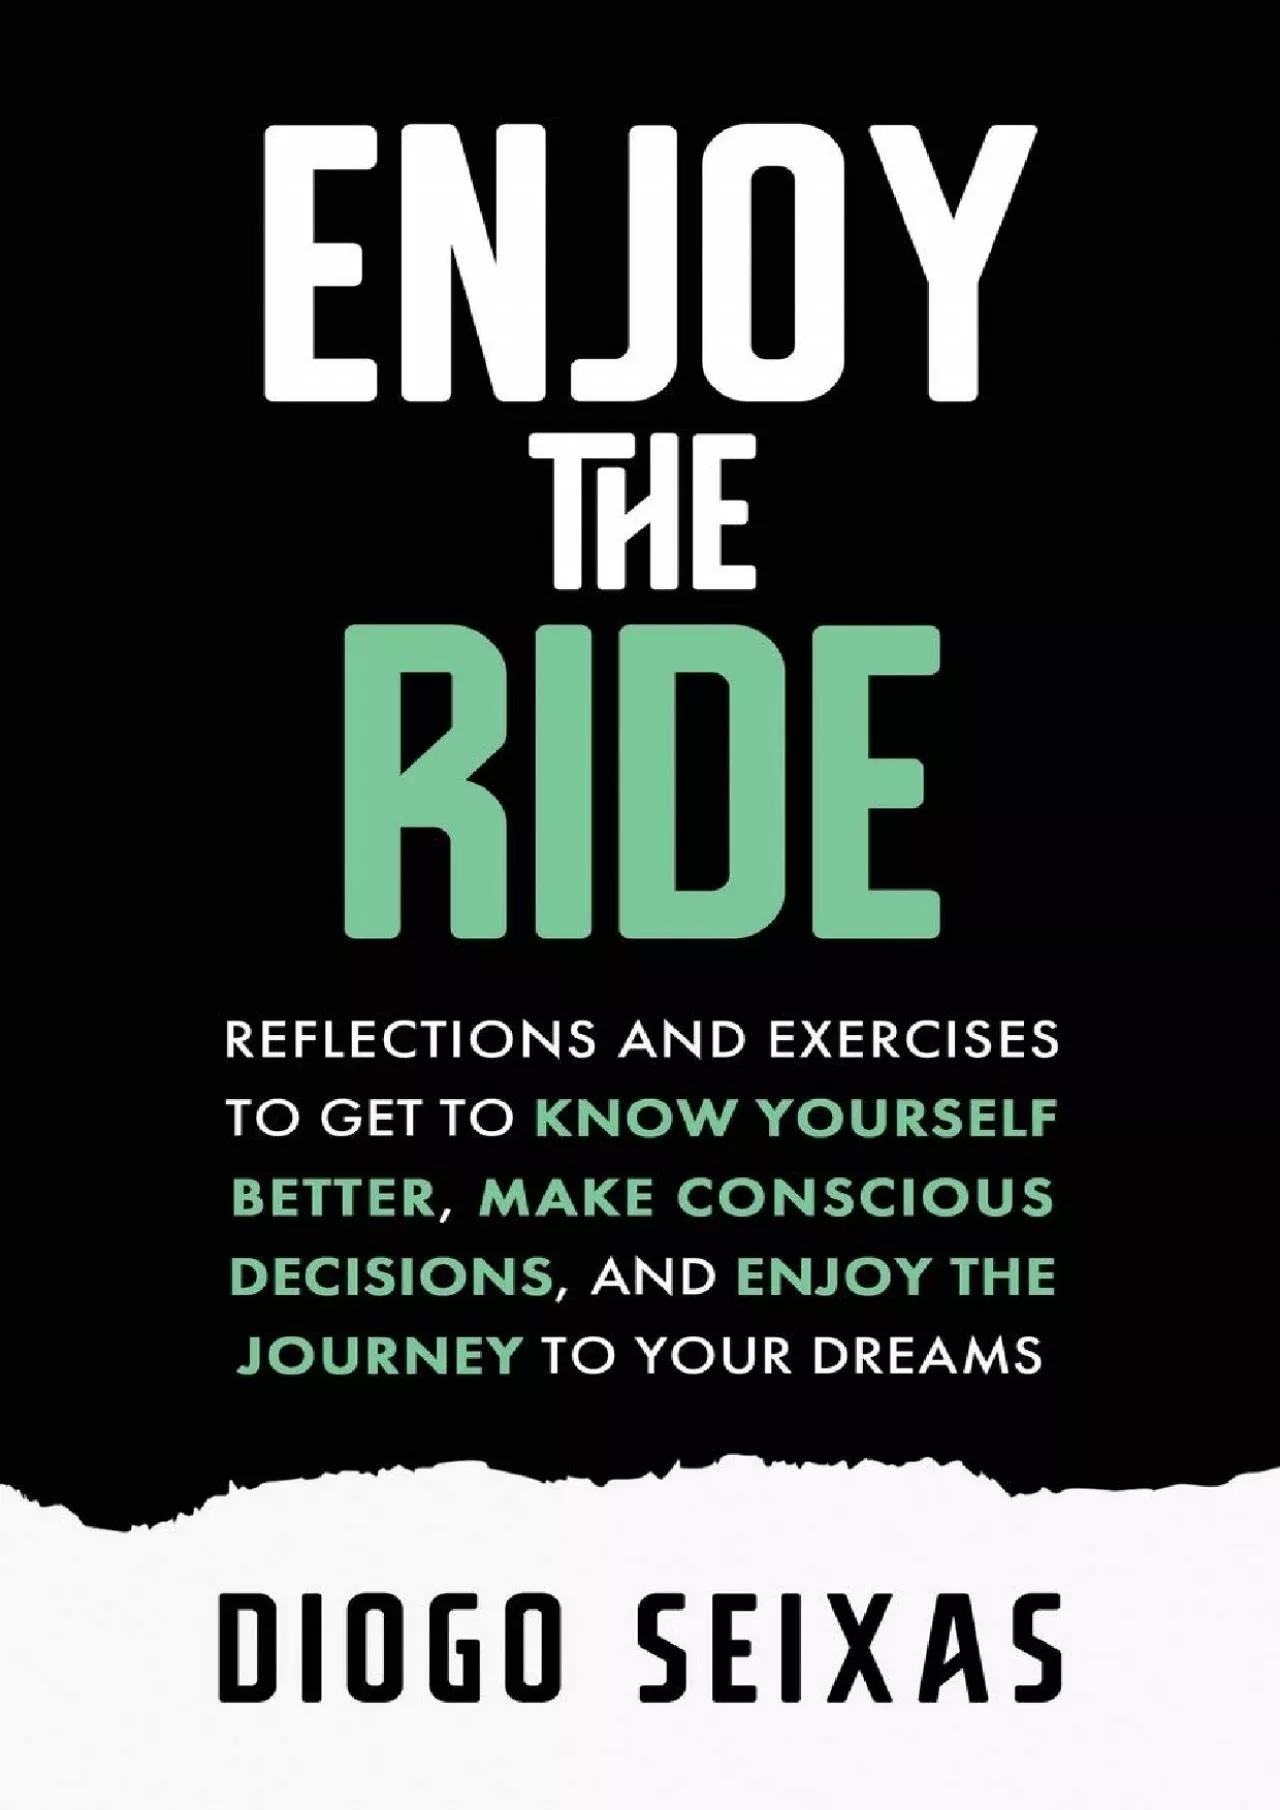 [DOWNLOAD] Enjoy the Ride: Reflections and exercises to get to know yourself better, make